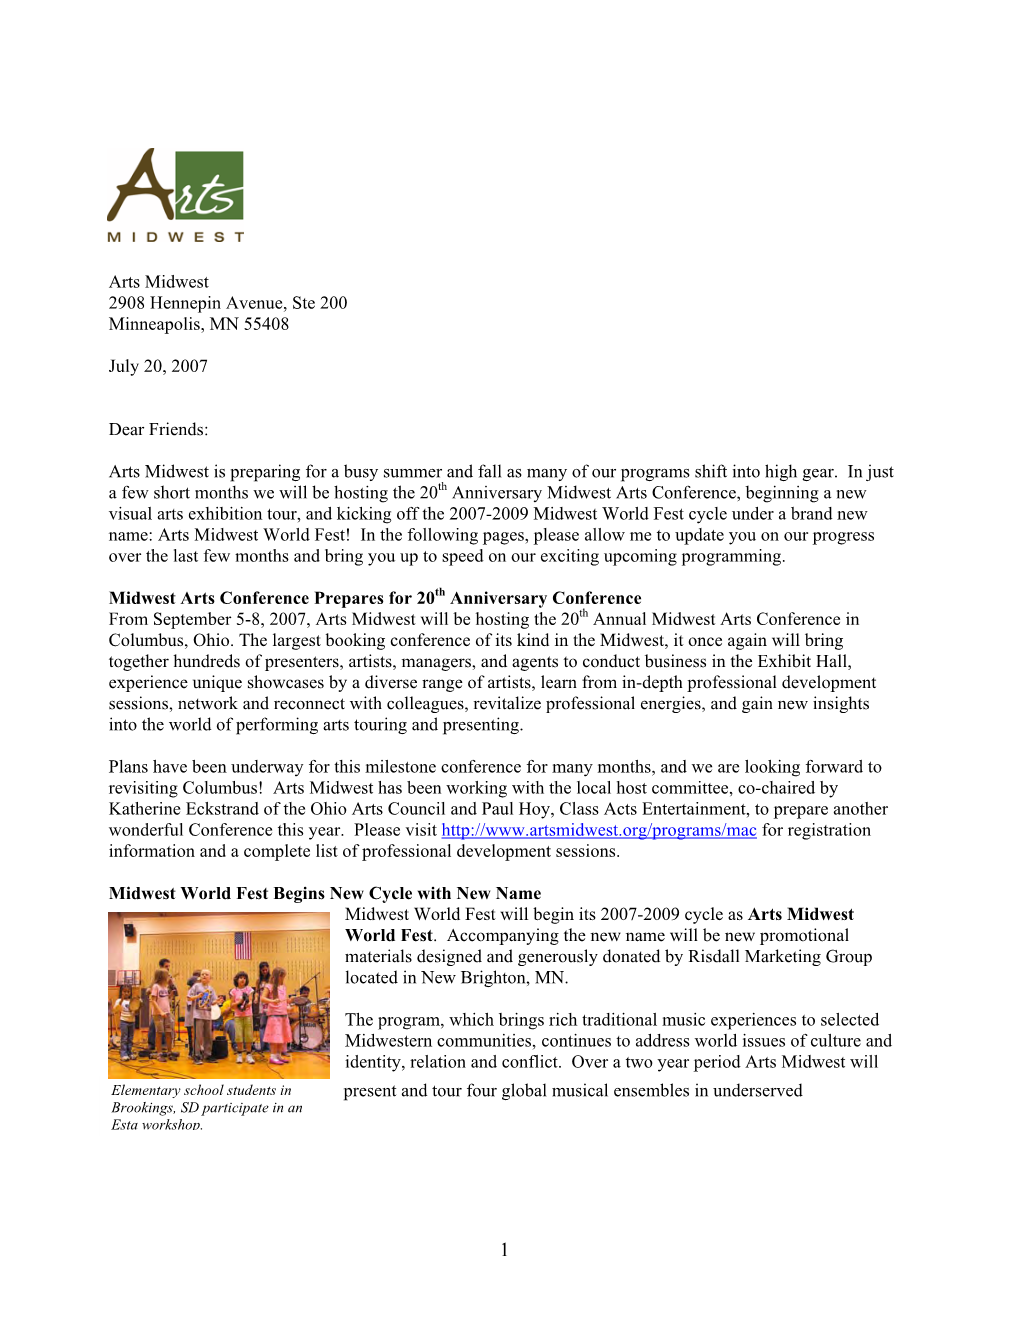 Arts Midwest Quarterly Newsletter